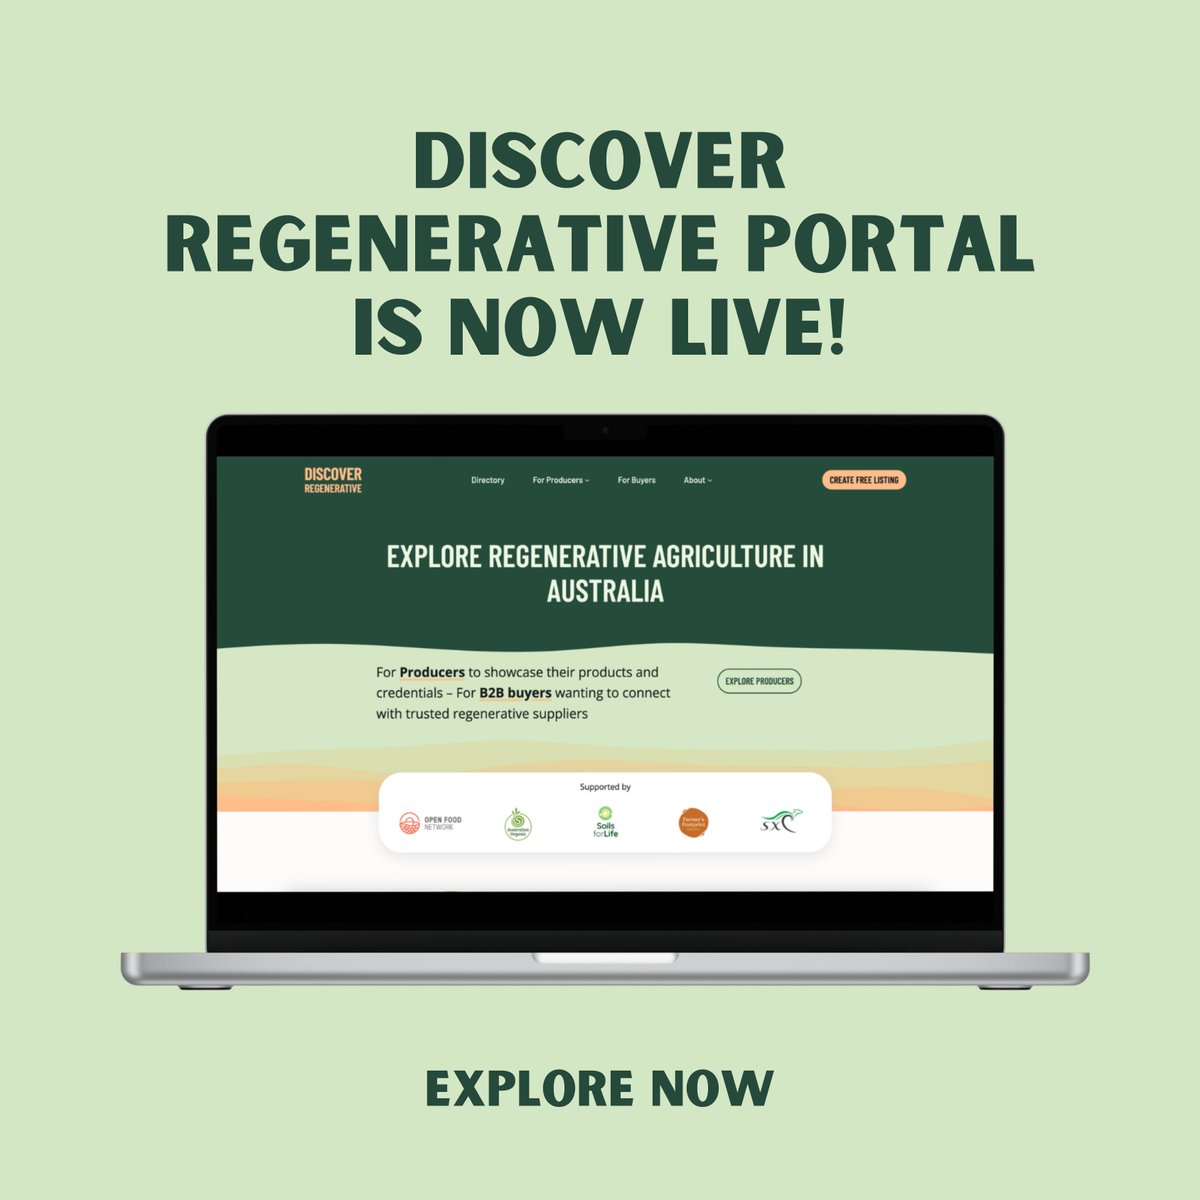 Discover Regenerative Portal that has launched. It provides a place for producers to showcase their products and for buyers wanting to connect with trusted regenerative suppliers. Great to see Soils for Life case study farmers on there! More here: loom.ly/6e_luv0